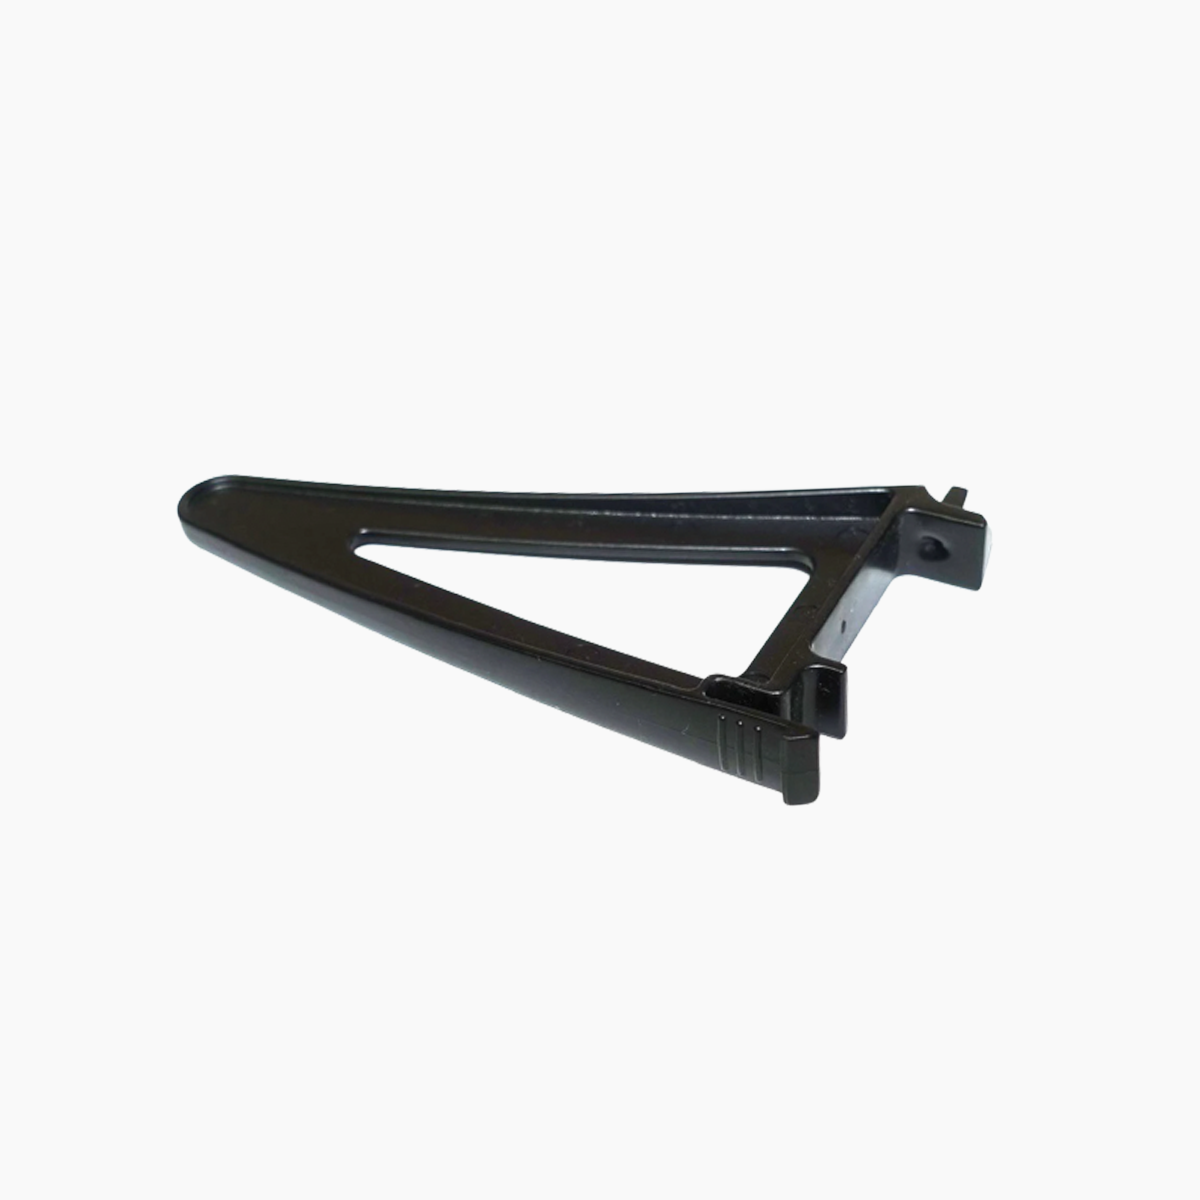 Replacement - Kickstand for PhotoSpring 8 (Black)